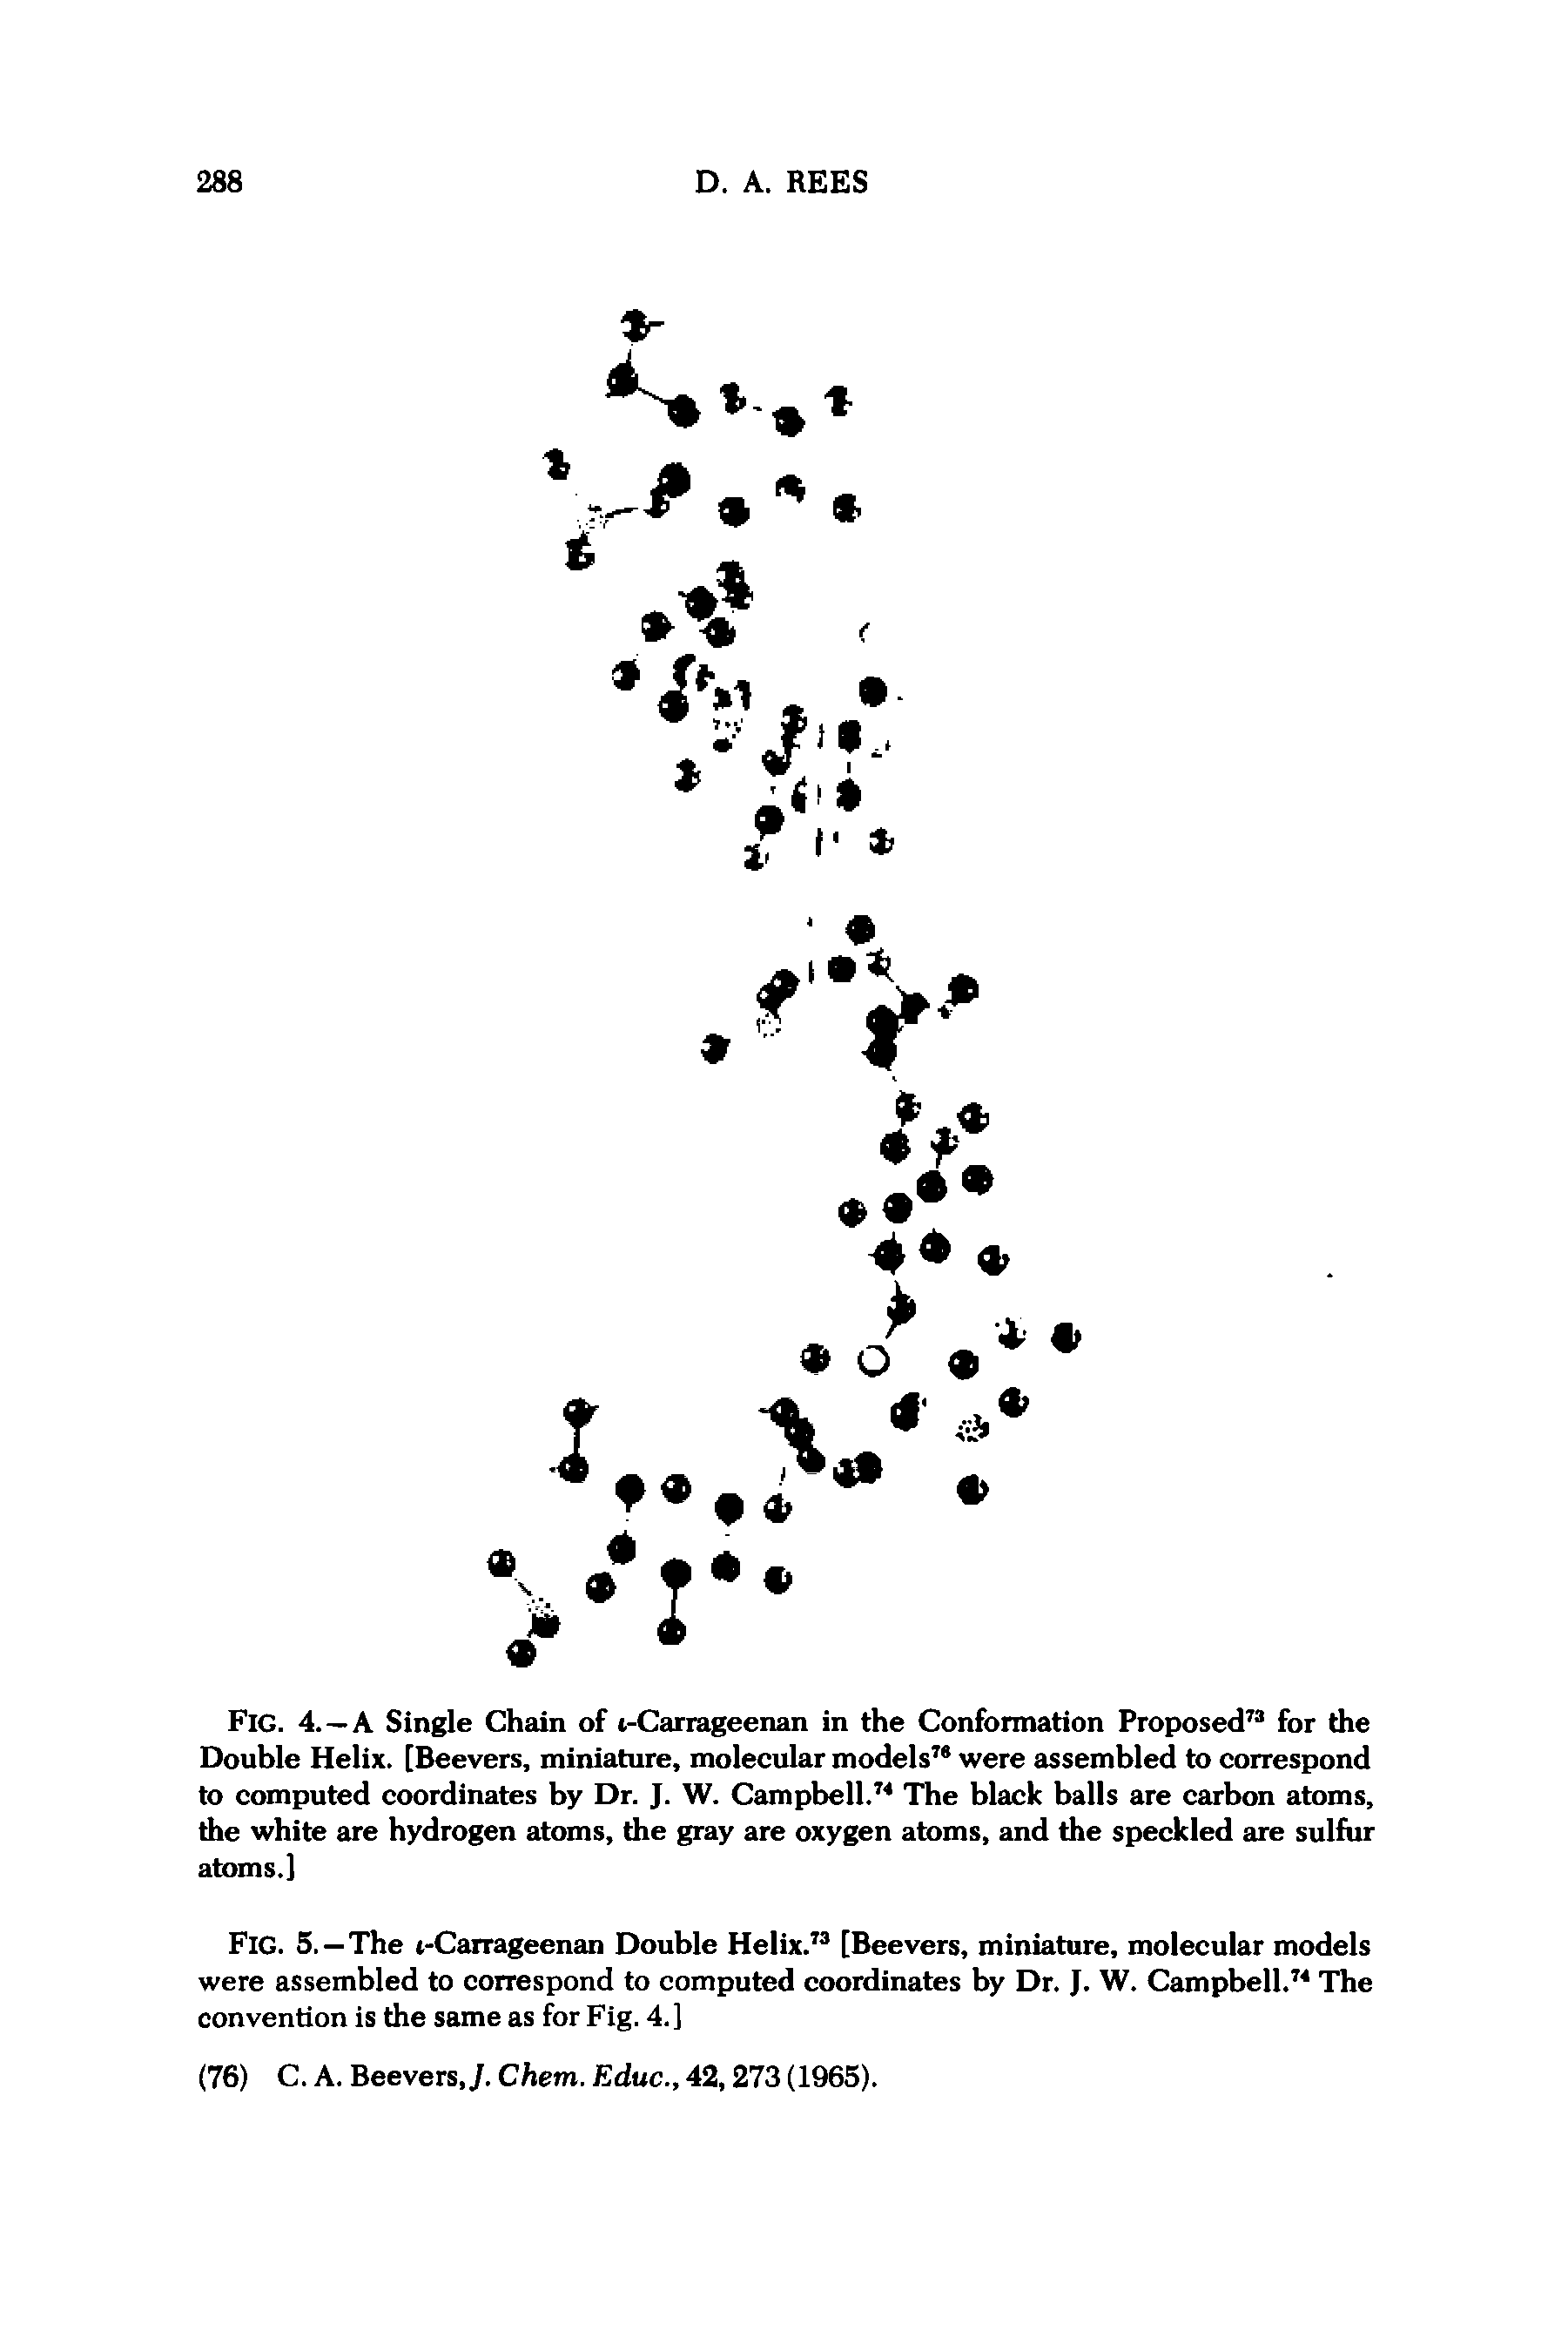 Fig. 4. —A Single Chain of i-Carrageenan in the Confonnation Proposed for the Double Helix. [Beevers, miniature, molecular models were assembled to correspond to computed coordinates by Dr. J. W. Campbell. The black balls are carbon atoms, the white are hydrogen atoms, the gray are oxygen atoms, and the speckled are sulfur atoms.]...